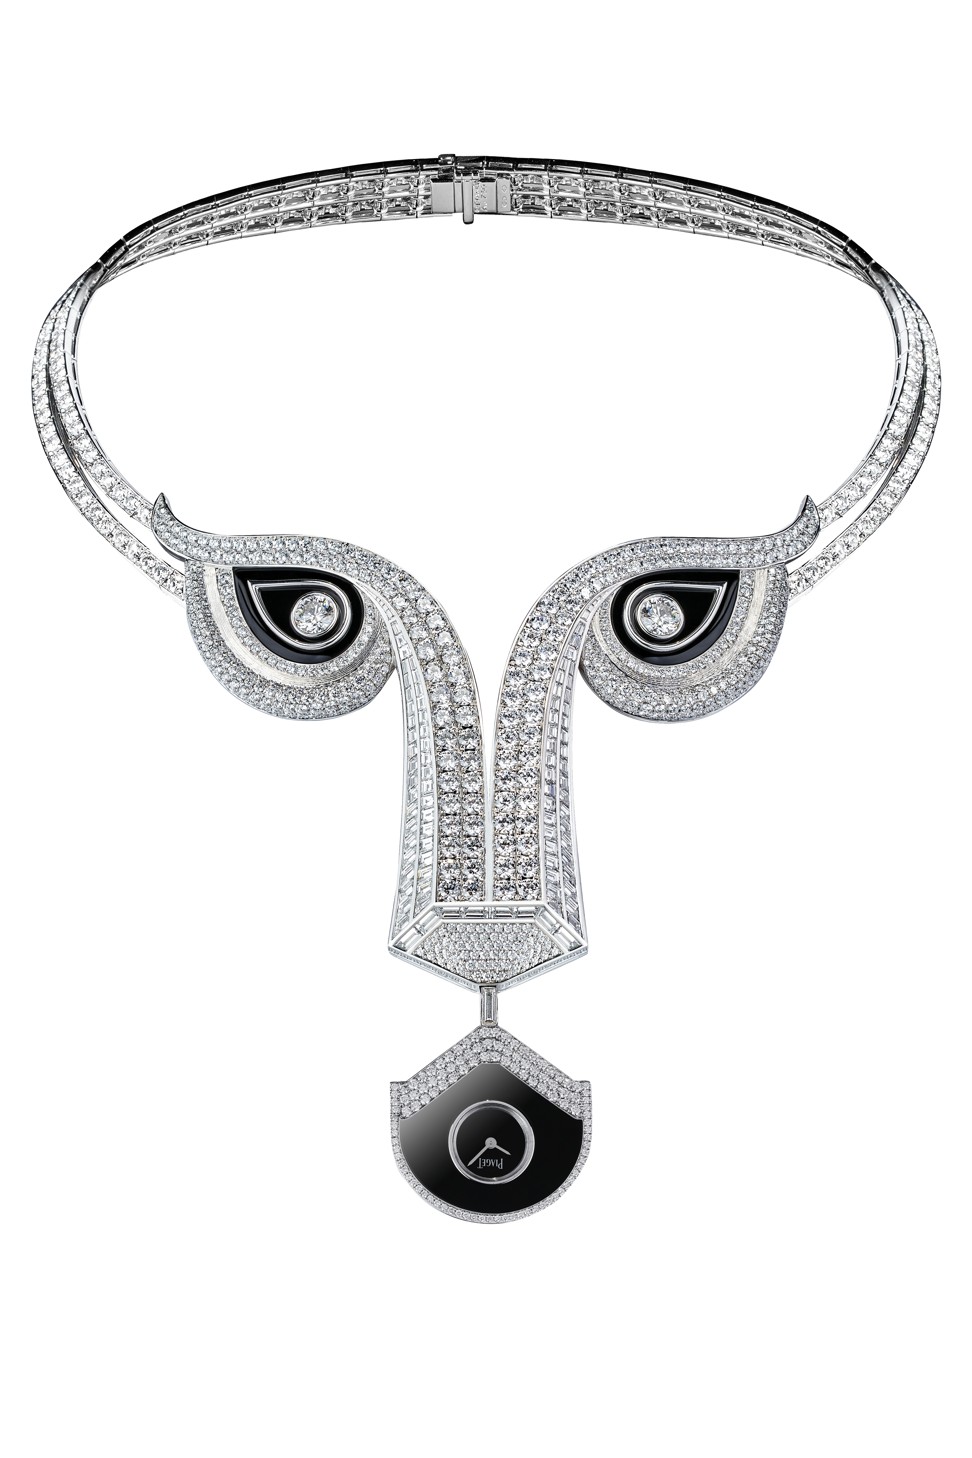 The Piaget Limelight Exceptional secret watch necklace is crafted from 18-carat white gold and set with baguette-cut diamonds. Photo: Piaget